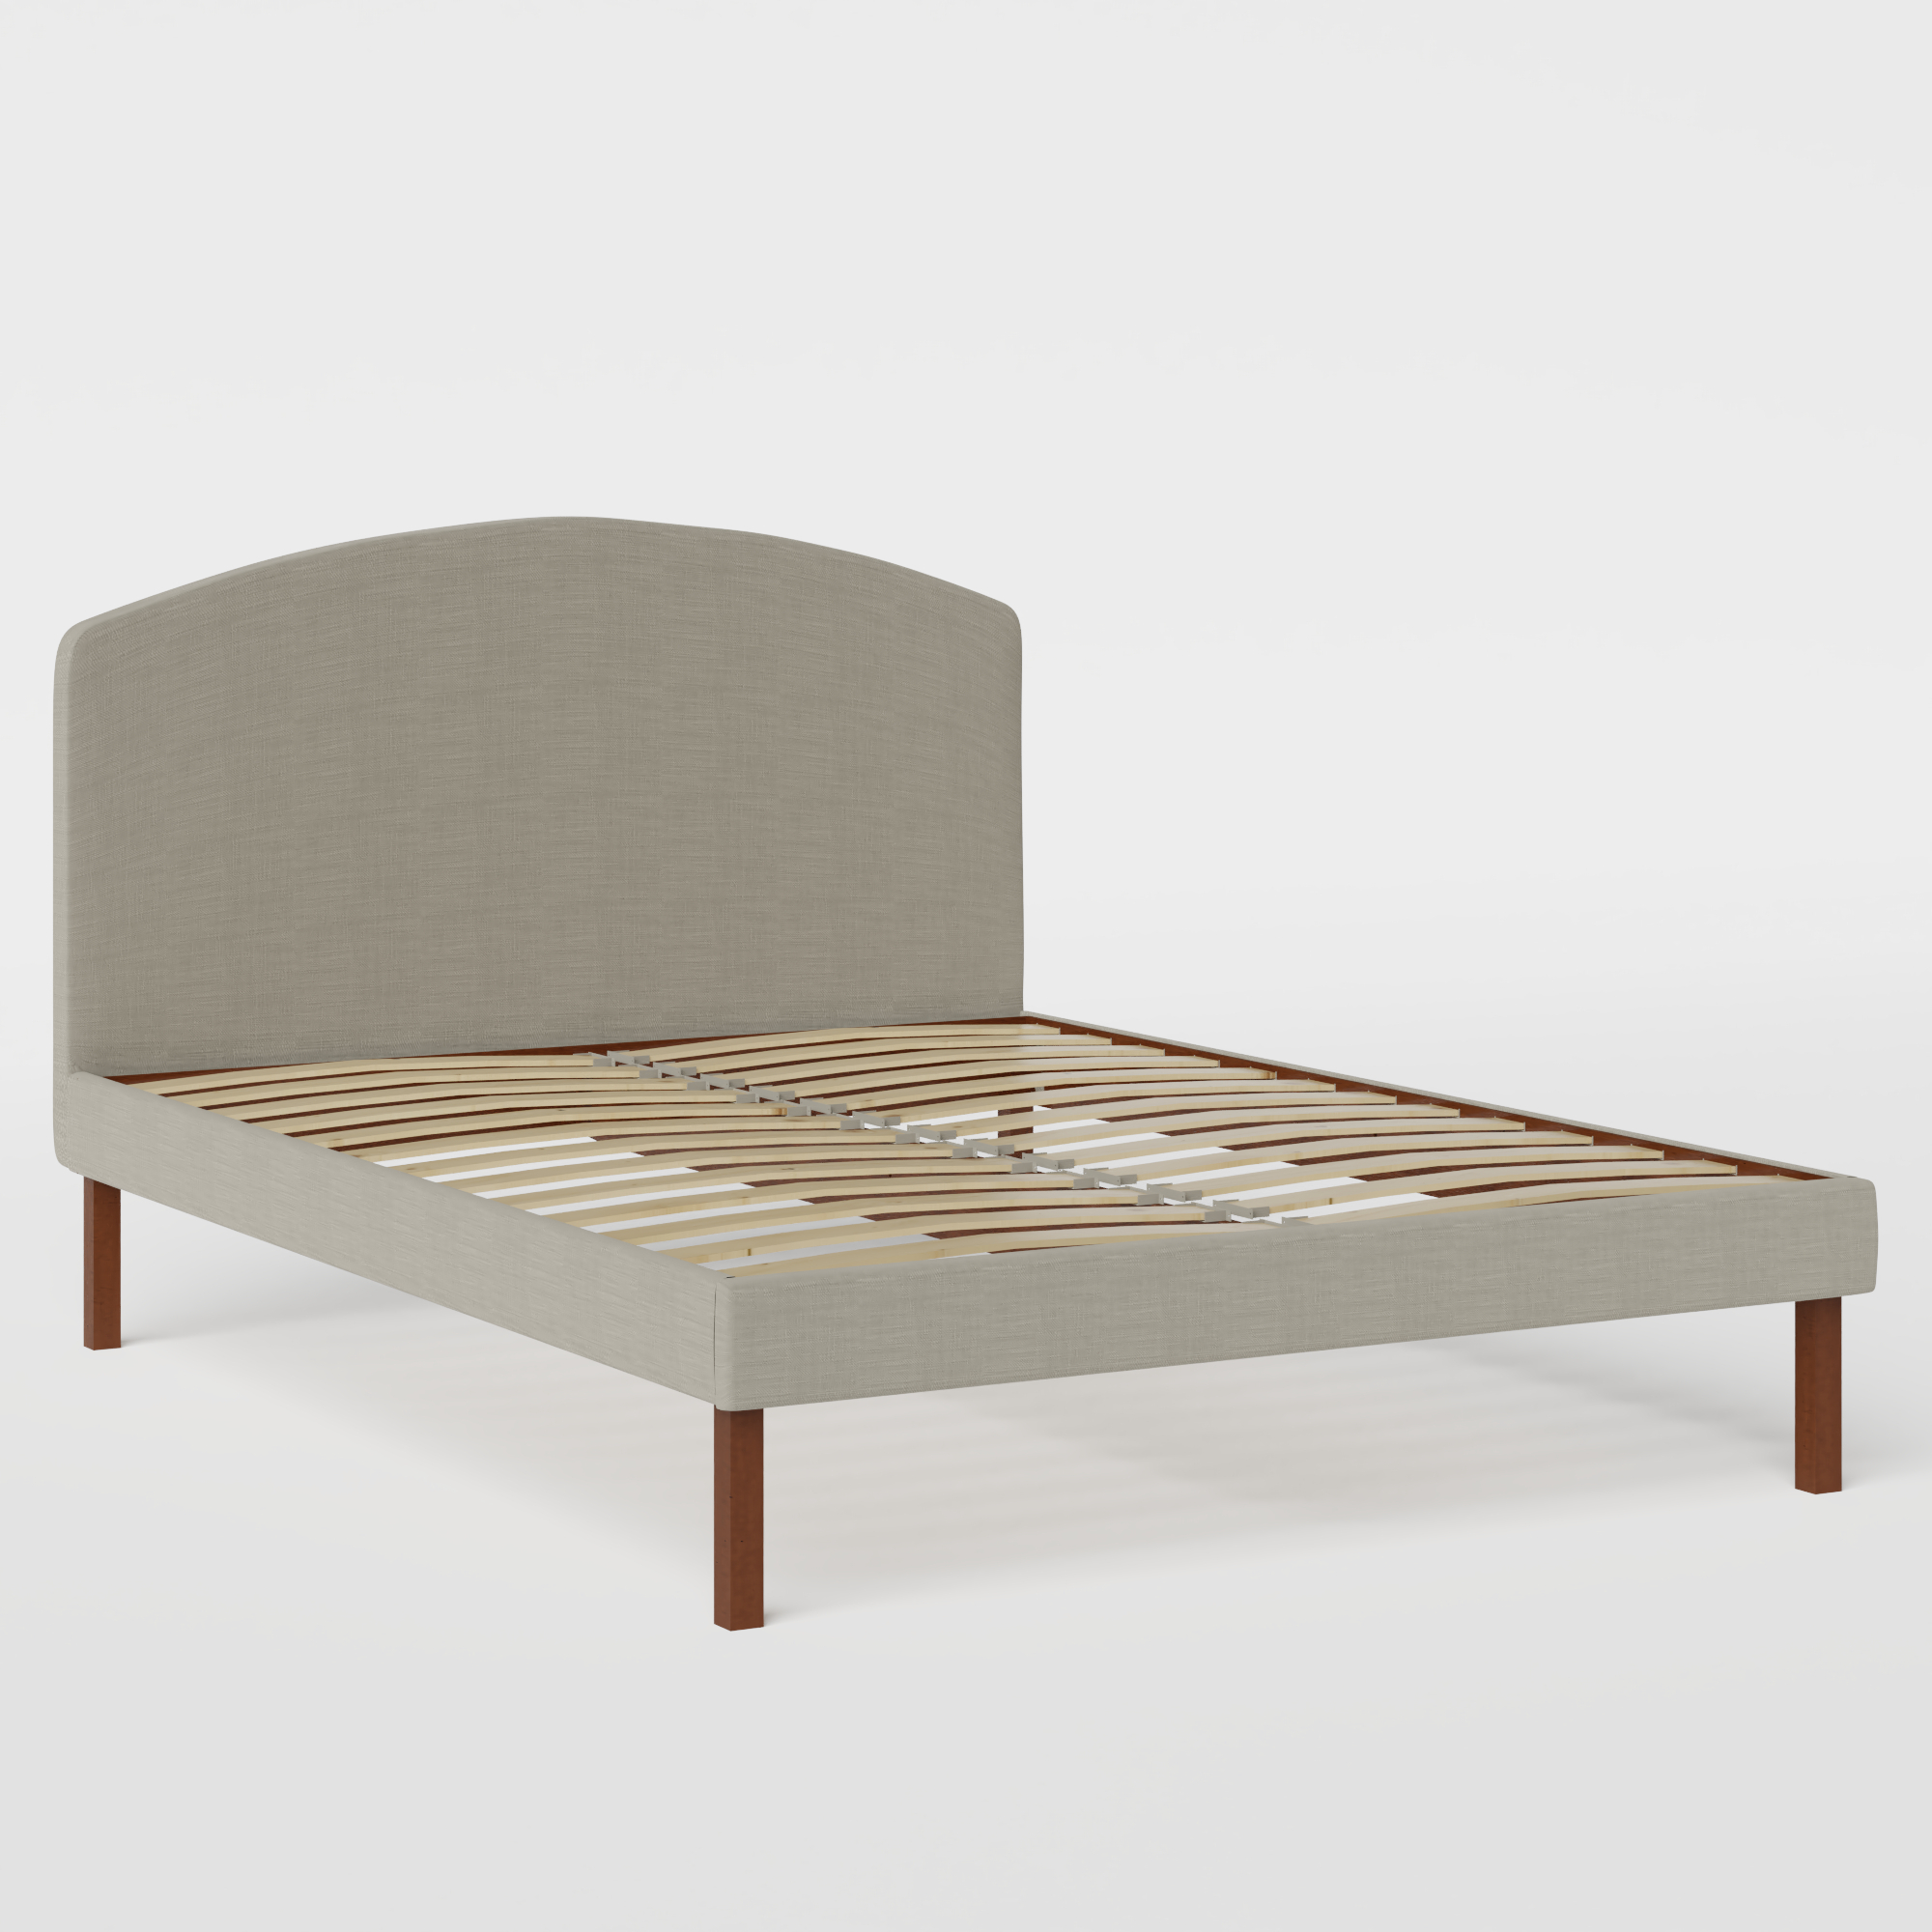 Okawa Upholstered stoffen bed in grijs